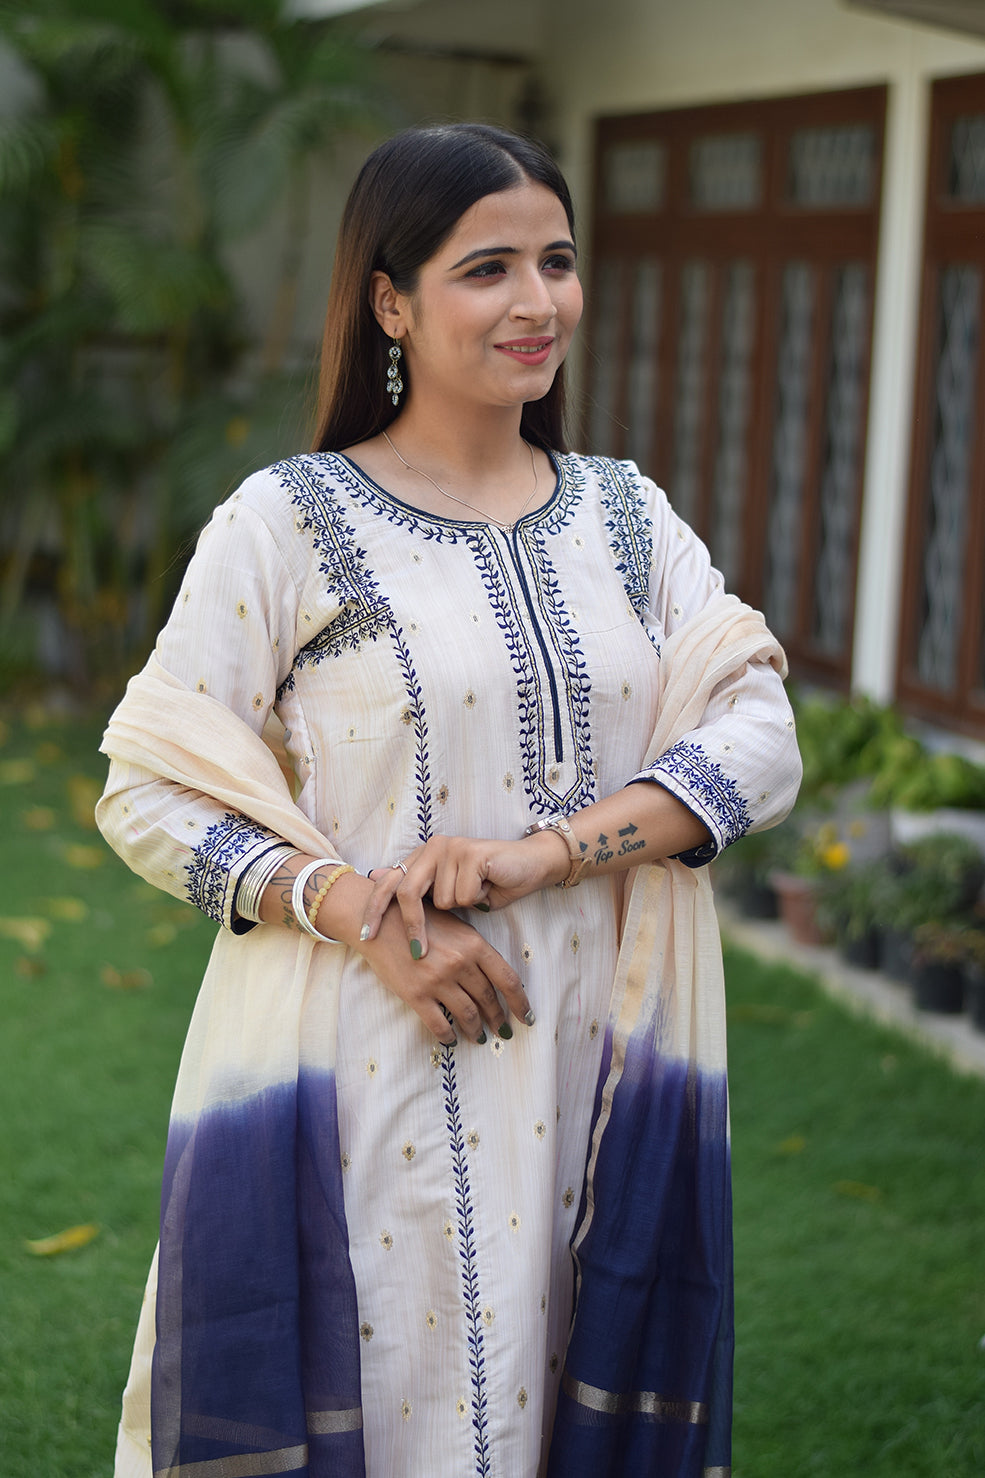 A radiant Indian woman wearing an Off-White Silk Kurta with a high neckline and delicate detailing.